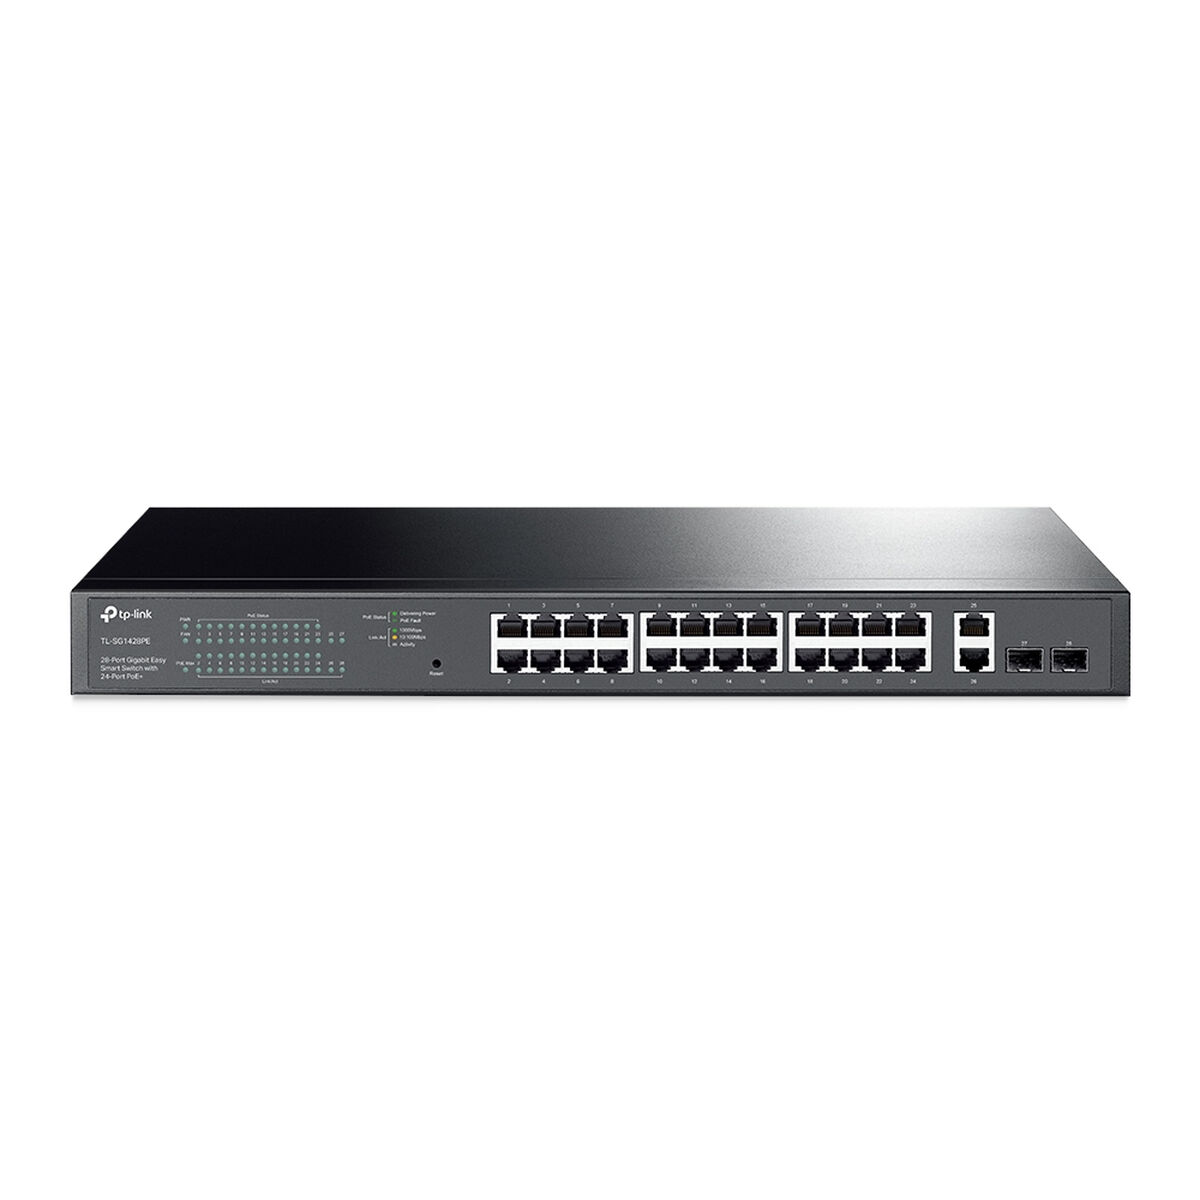 TL-SG1428PE 26 TP-LINK Switch